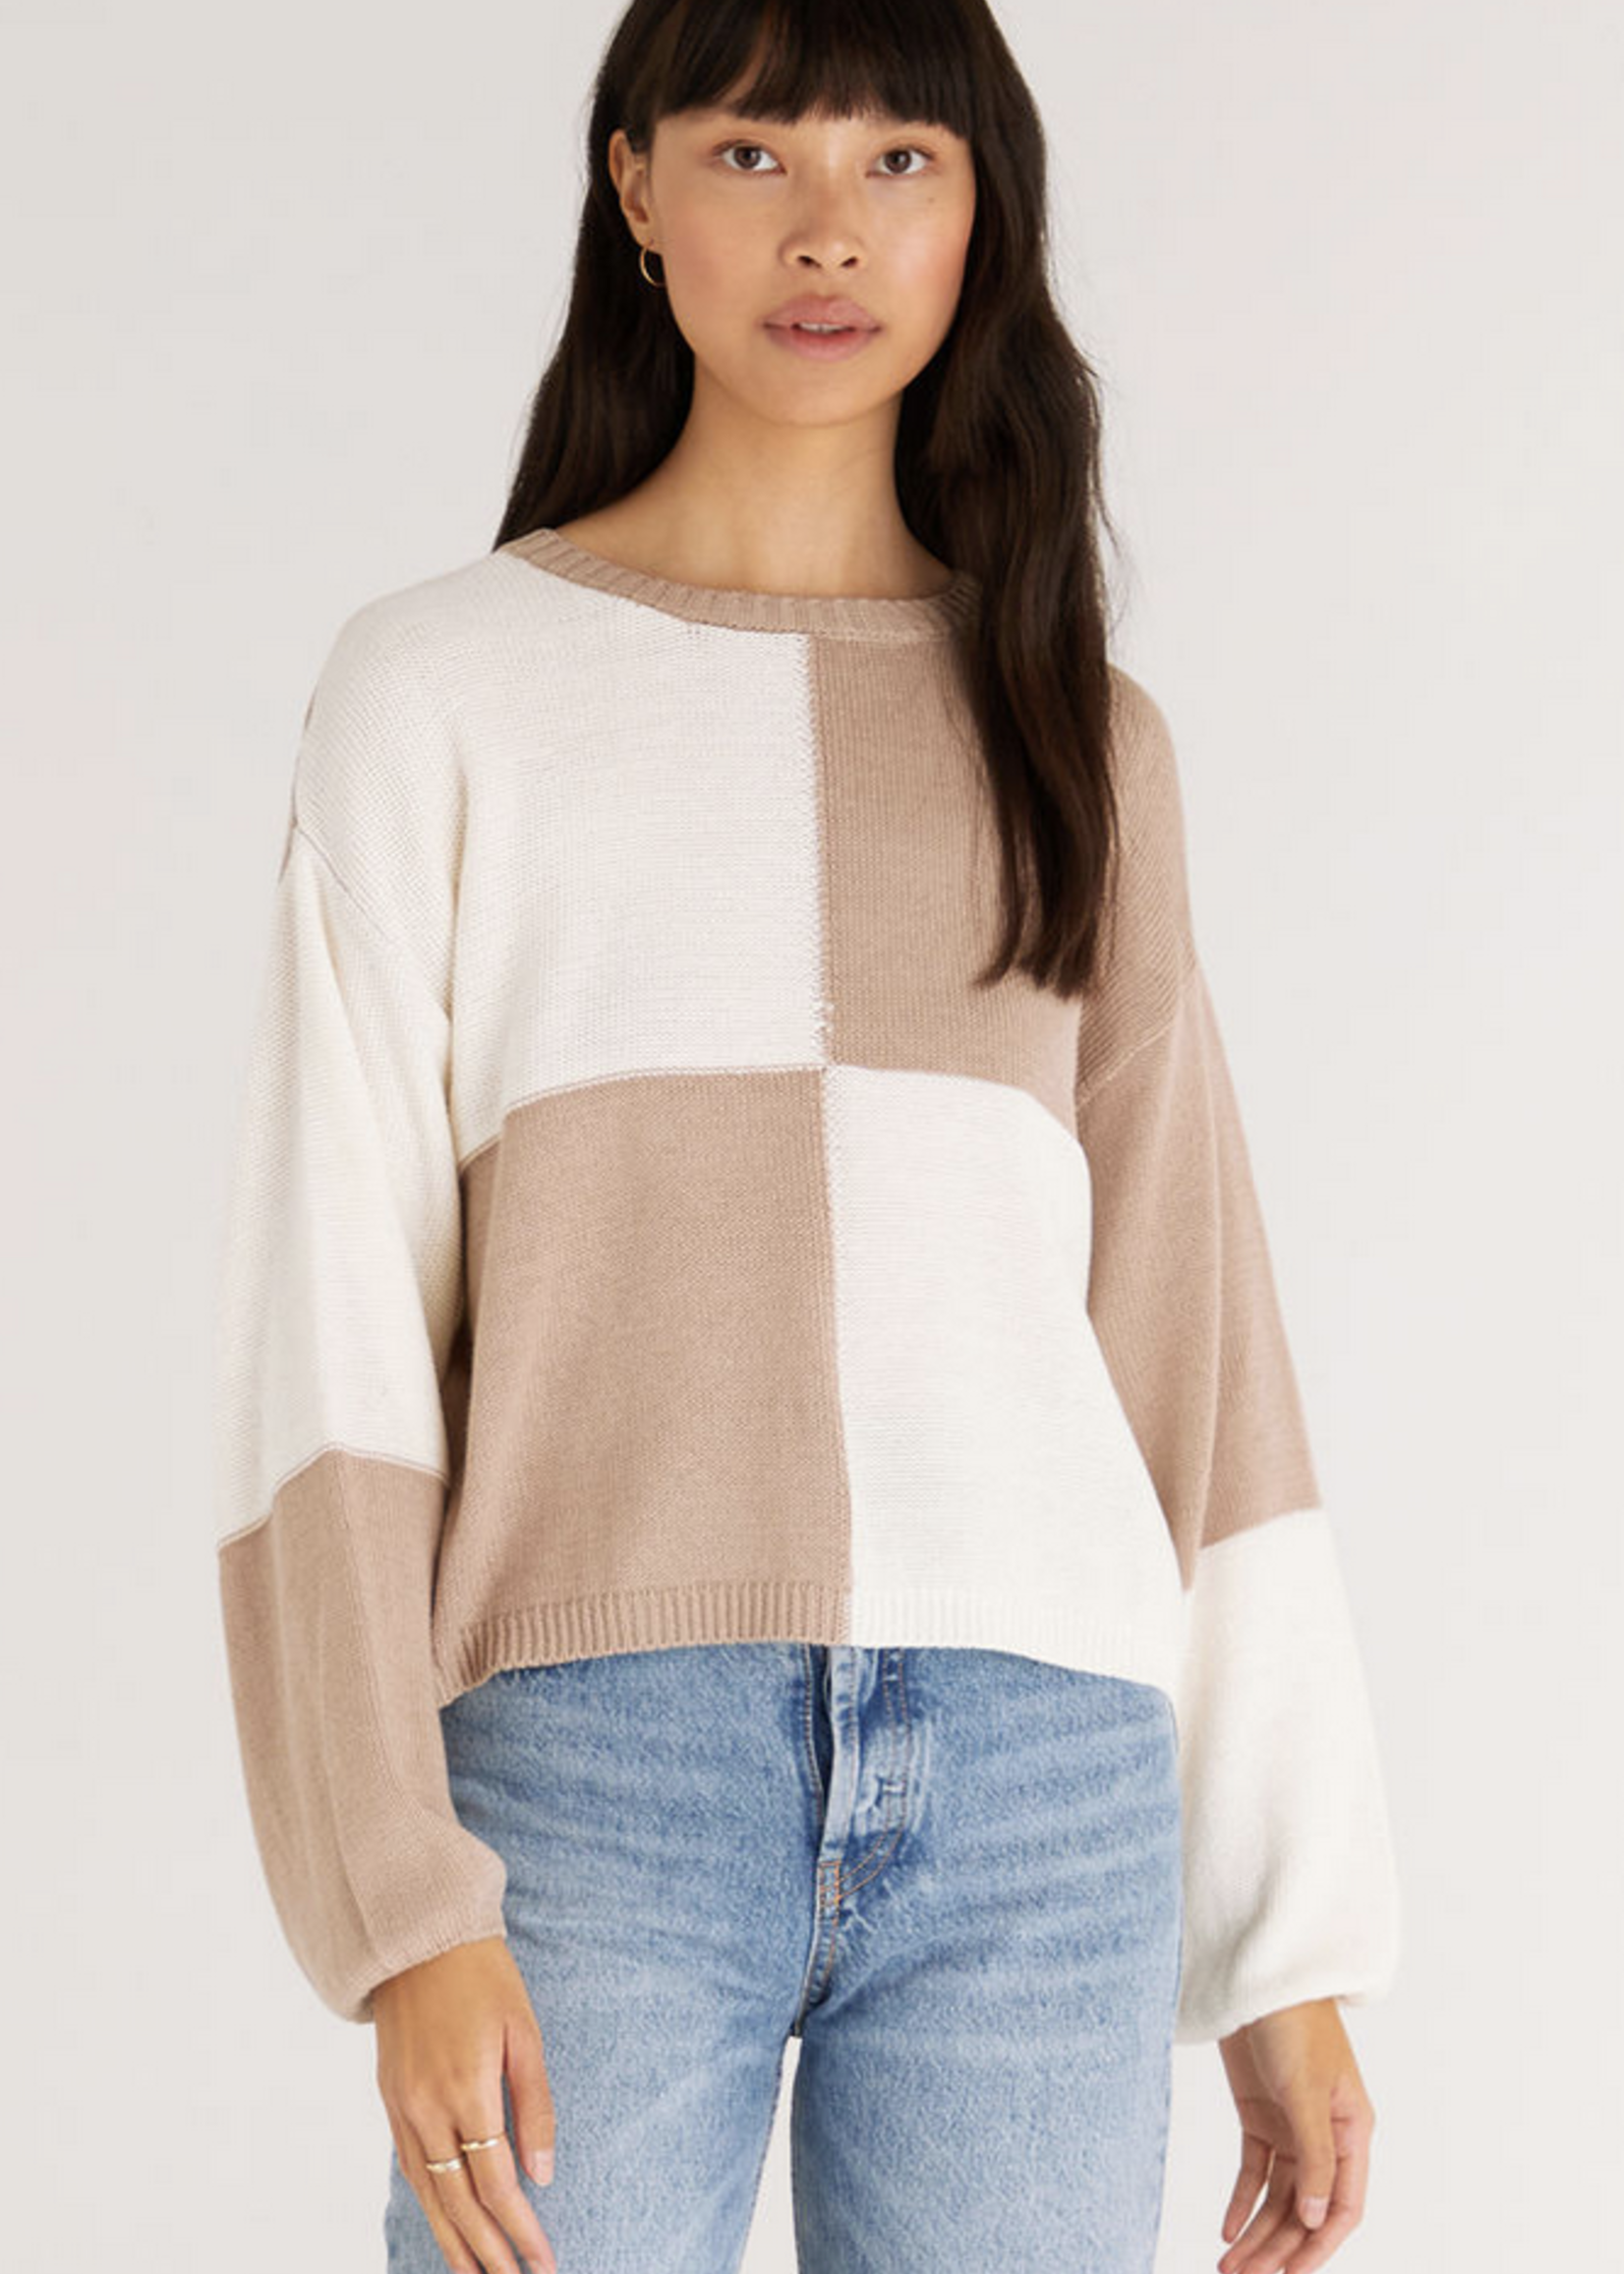 Z SUPPLY SOLANGE CHECK SWEATER